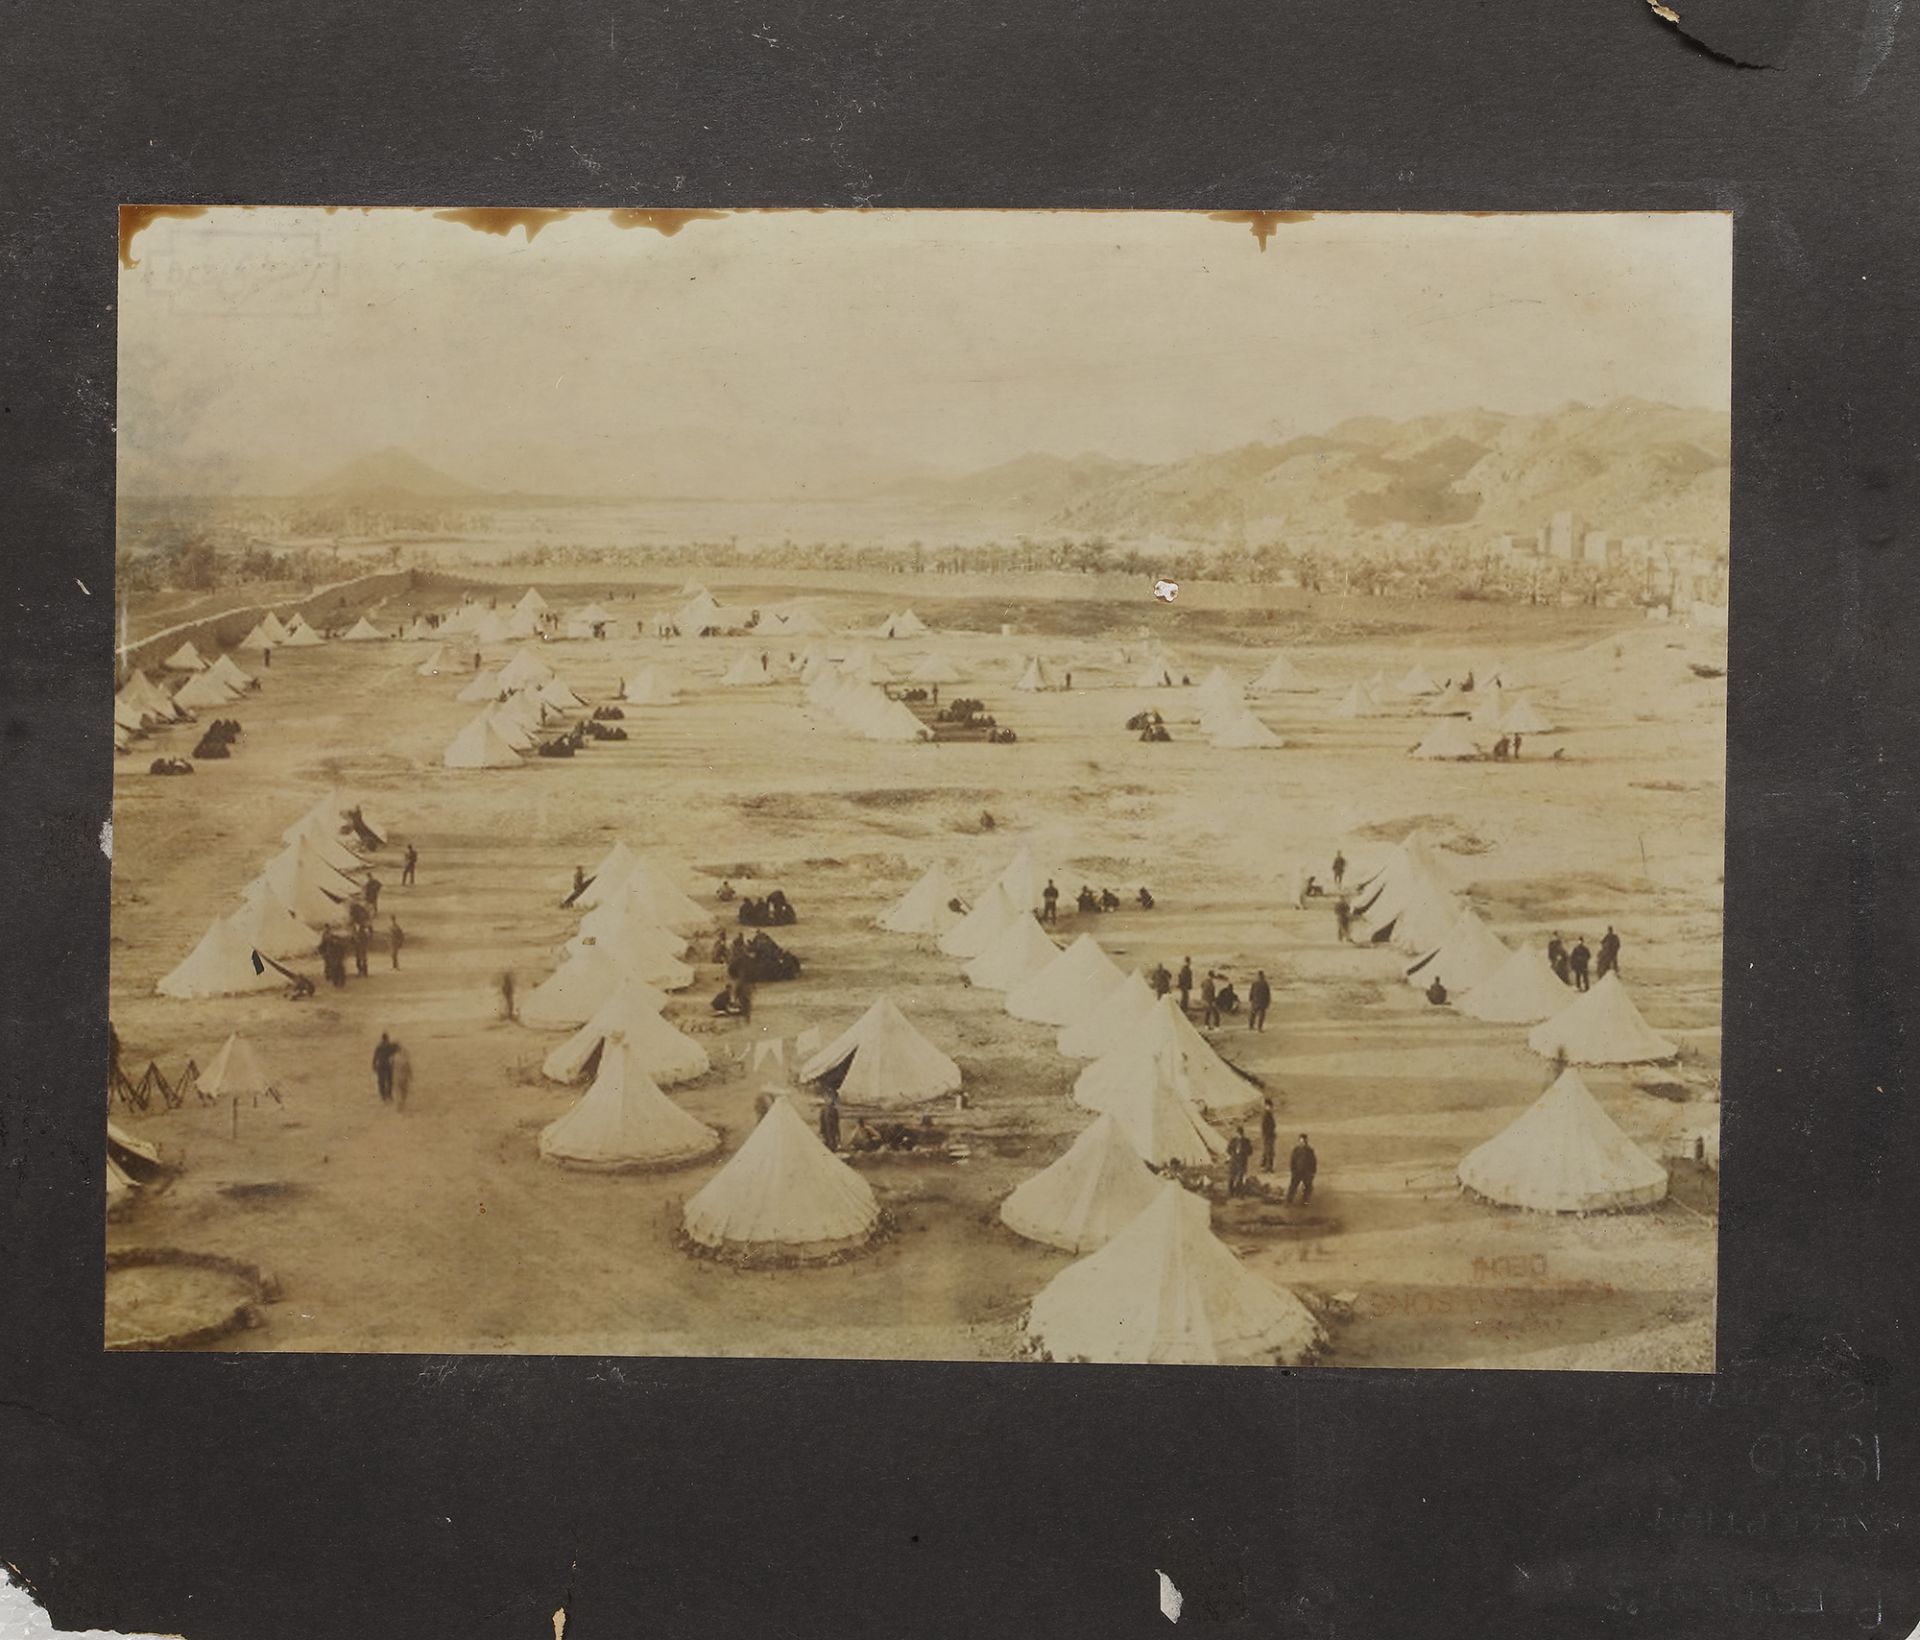 MECCA AND MEDINA, A COLLECTION OF 14 PHOTOGRAPHS DURING THE HAJJ, EARLY 20TH CENTURY - Image 10 of 15